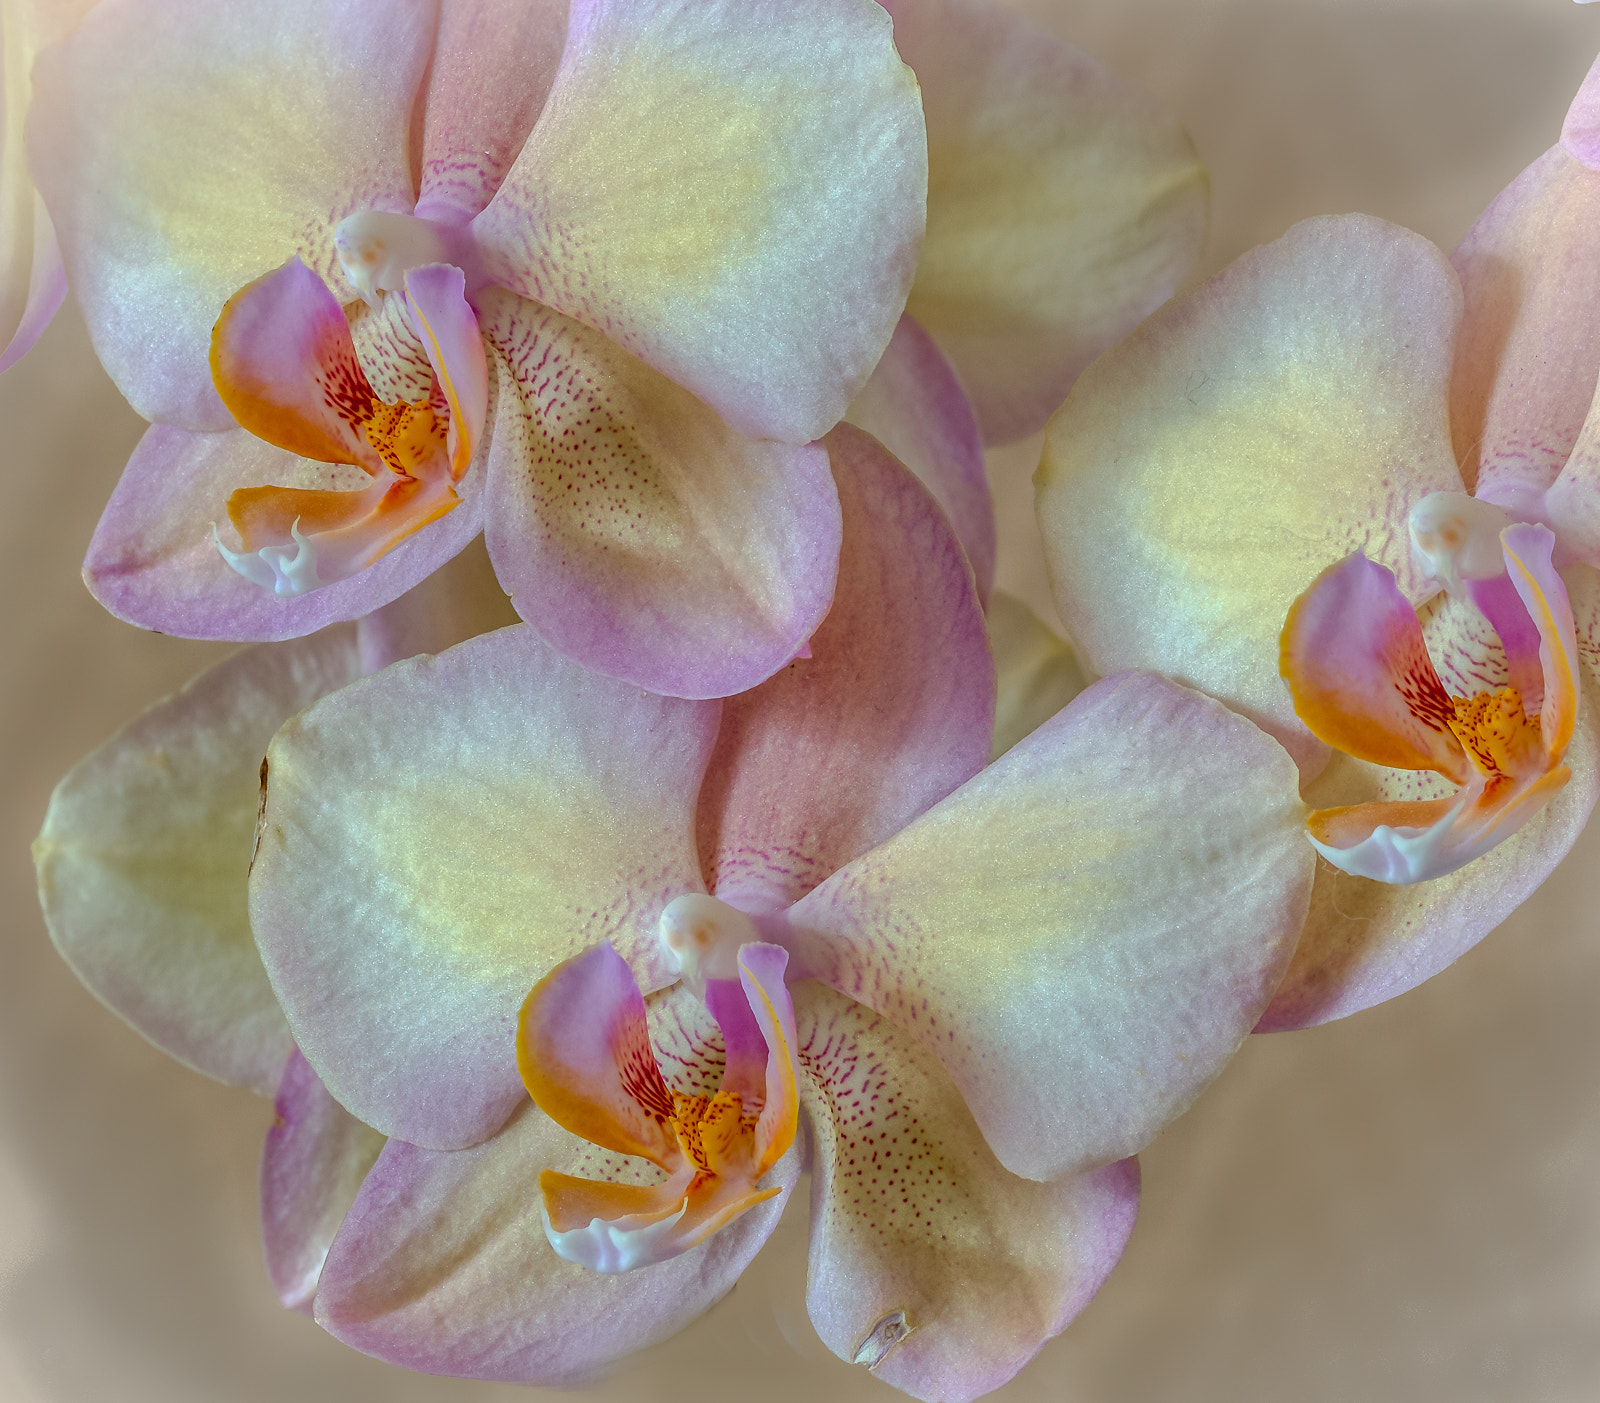 Sony SLT-A58 sample photo. Orchidee photography